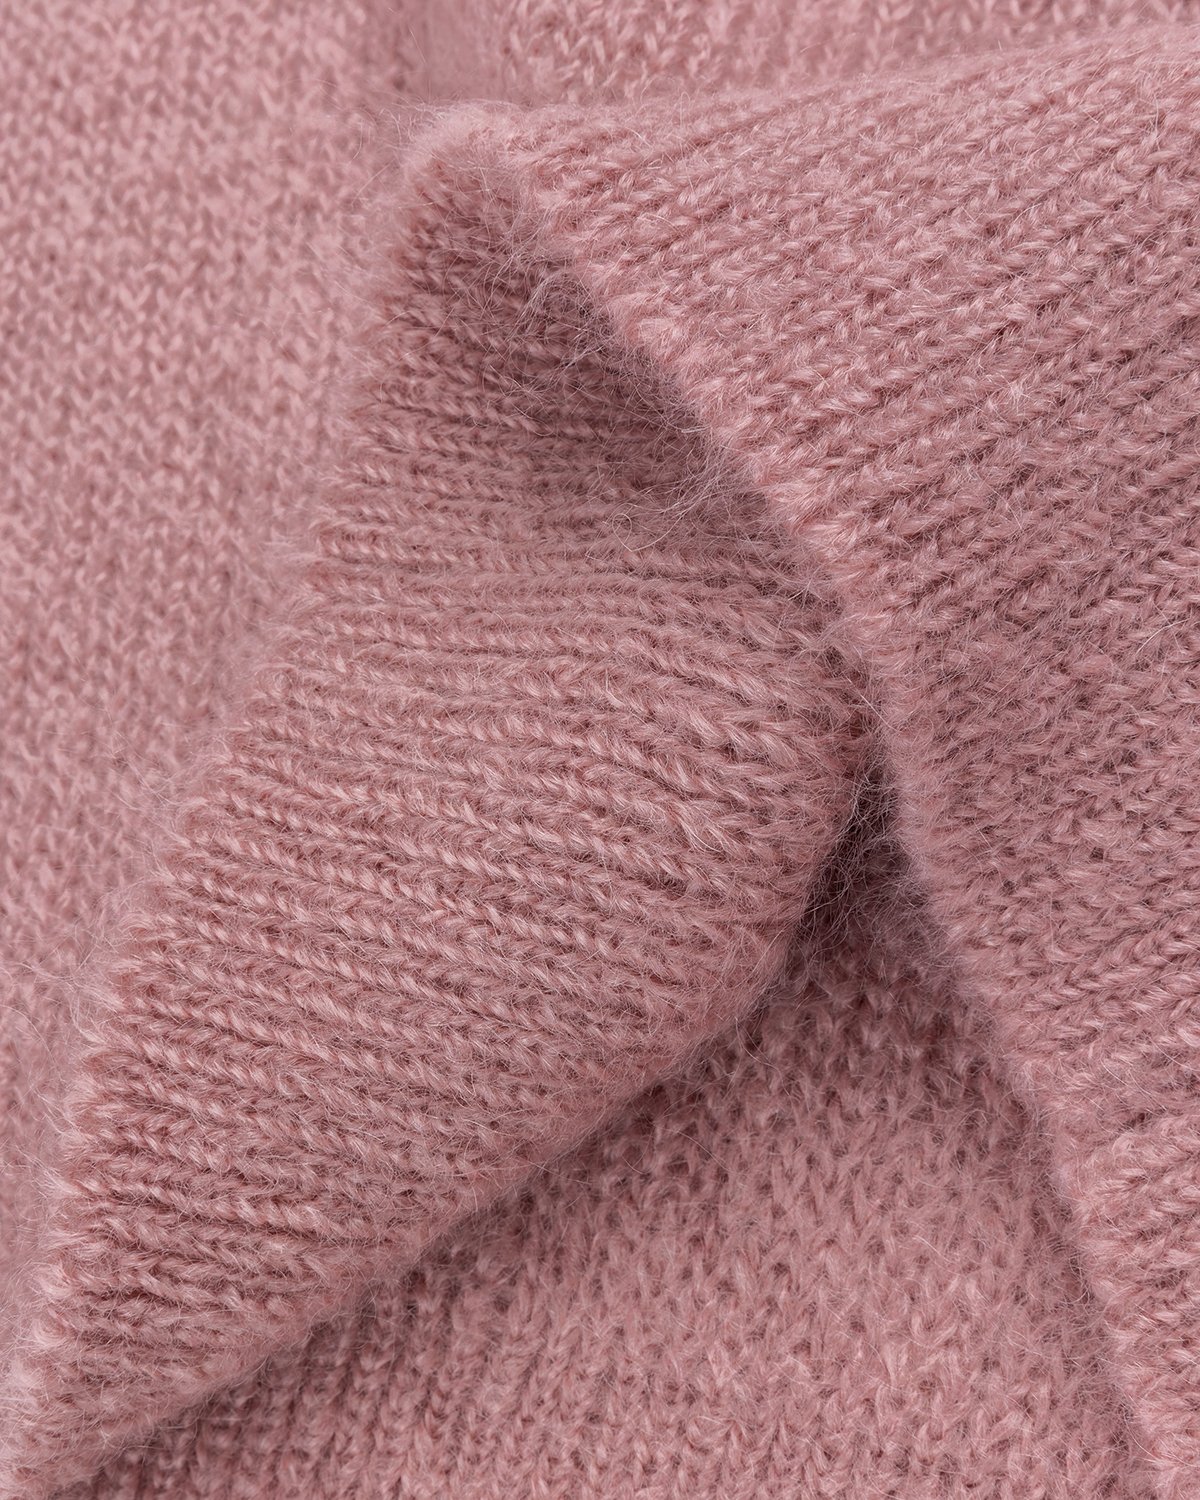 Jil Sander - Knitted Sweater Pink - Clothing - Pink - Image 4